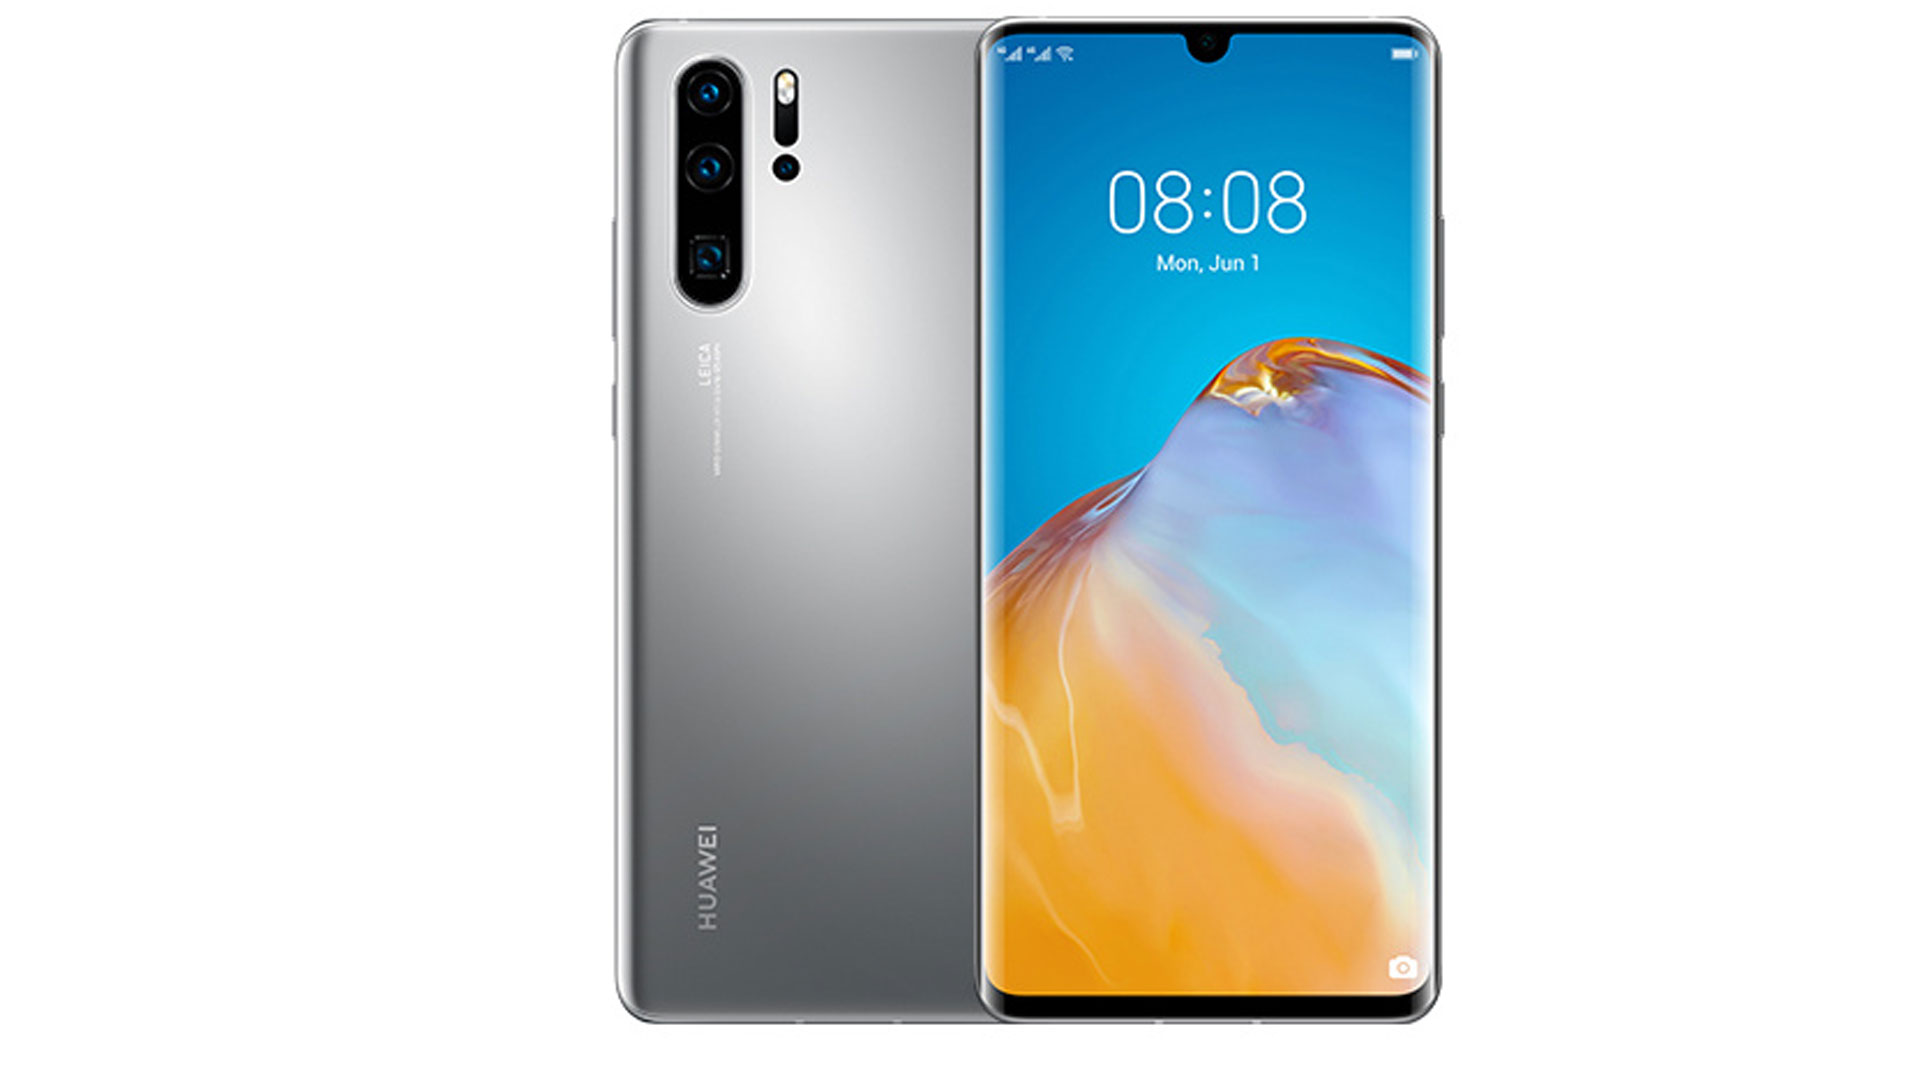 Huawei p30 new edition. Huawei p30 Pro New Edition. Хуавей.